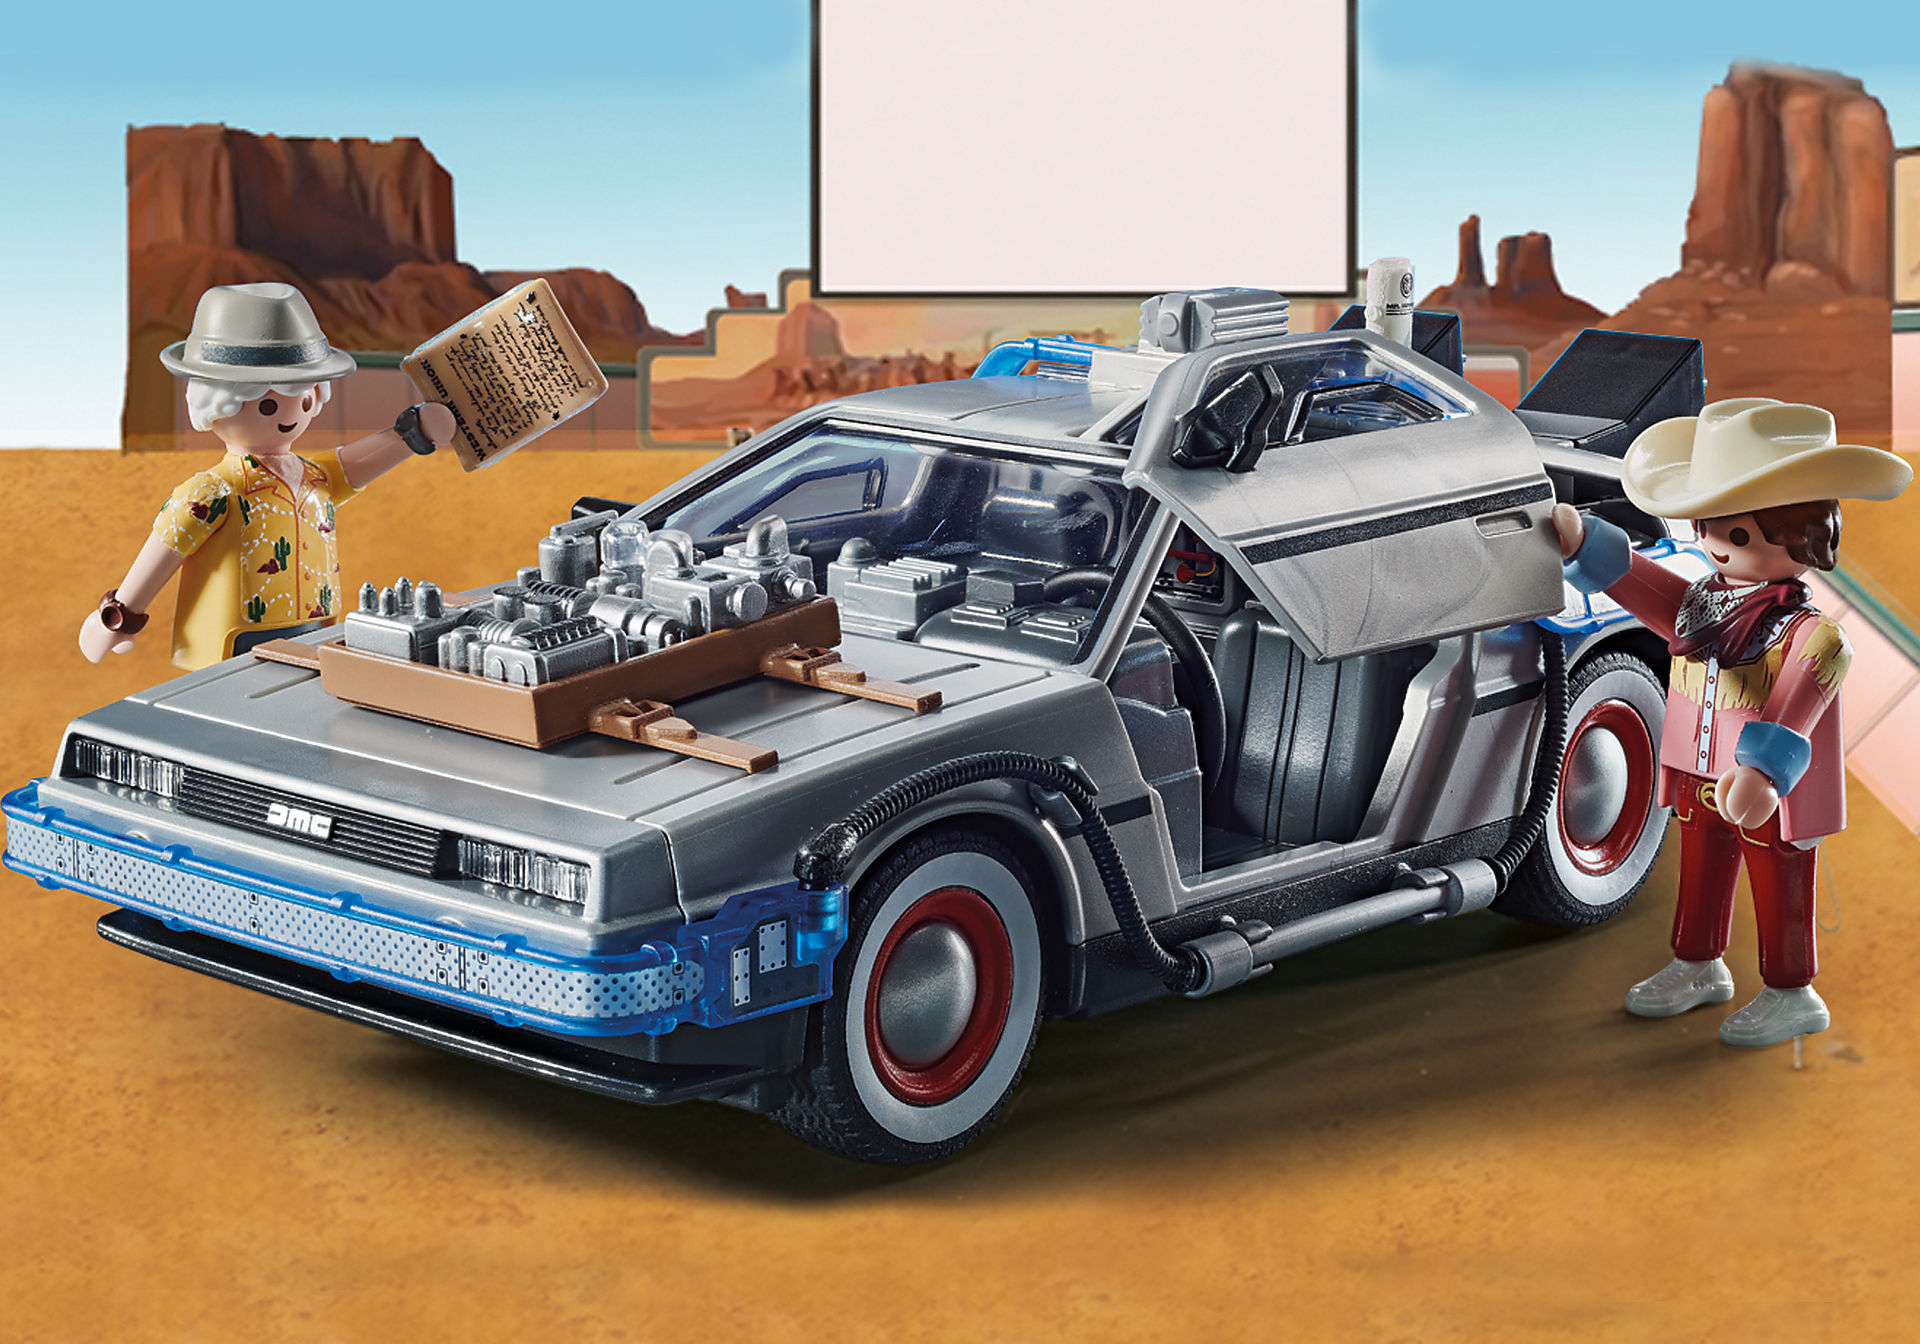 70576 Calendrier de l'Avent "Back to the Future Part III" zoom image6